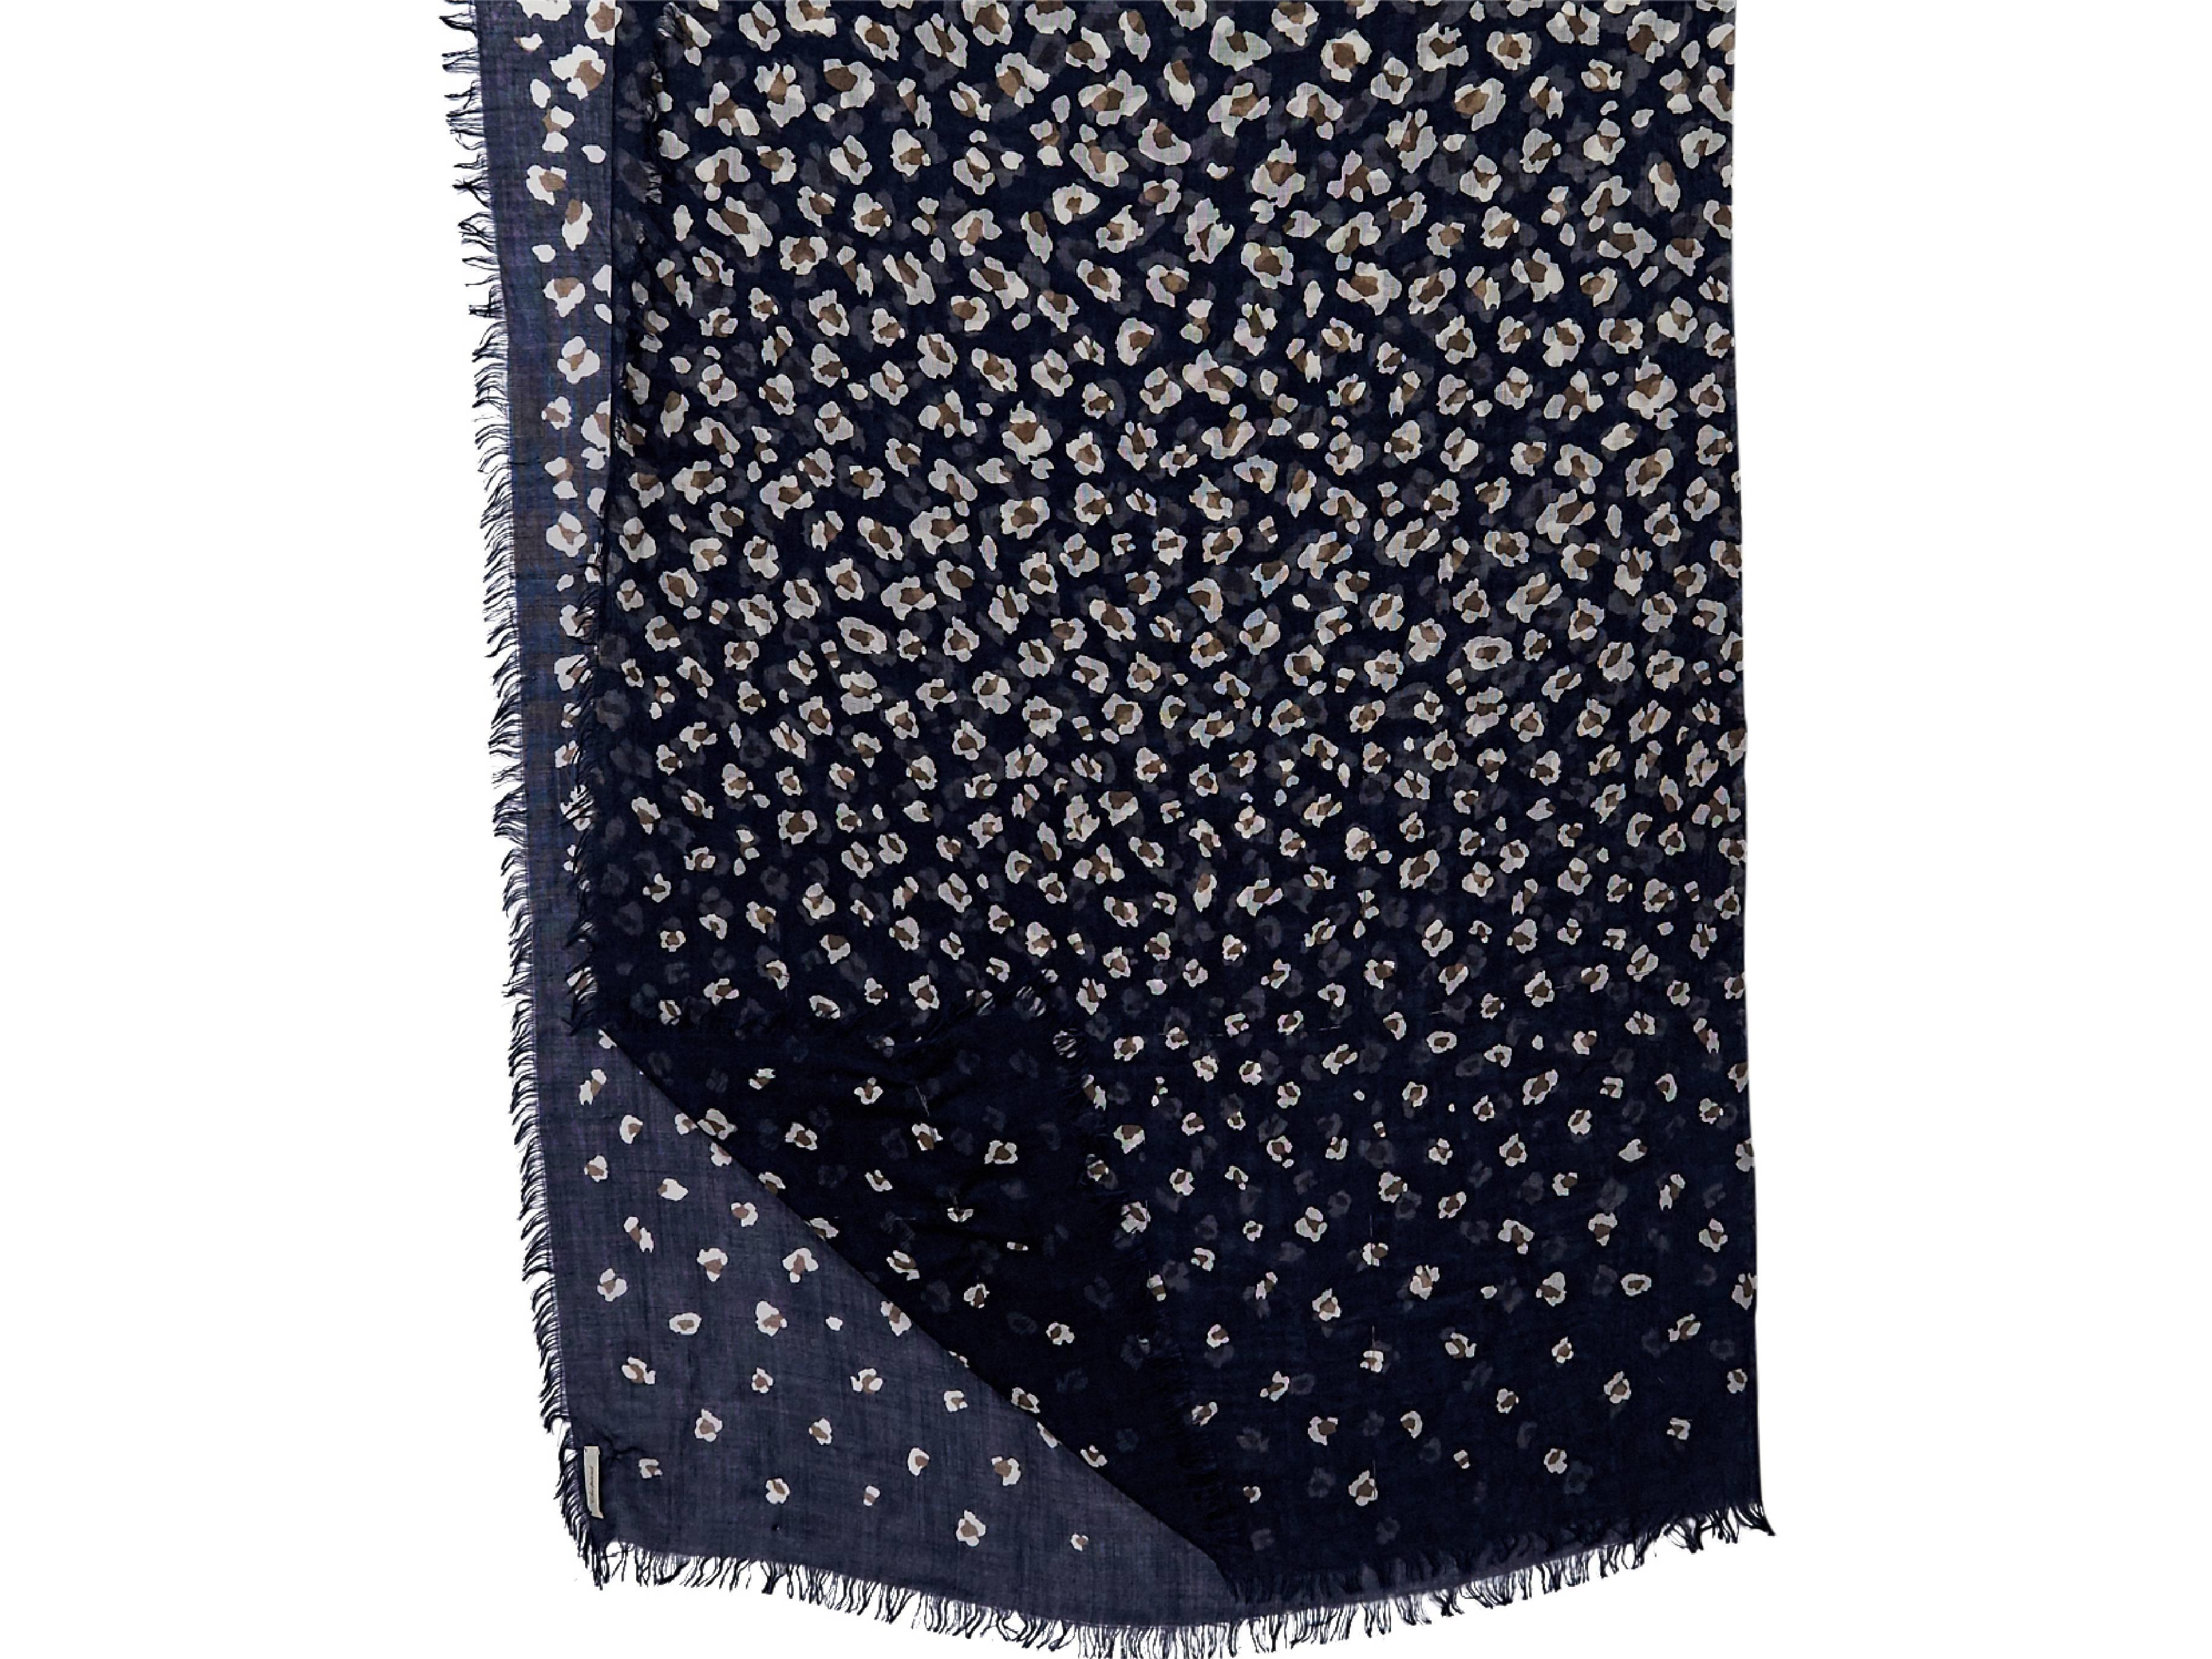 Product details:  Navy blue floral-printed scarf by Chopard.  Fringe trim.  72